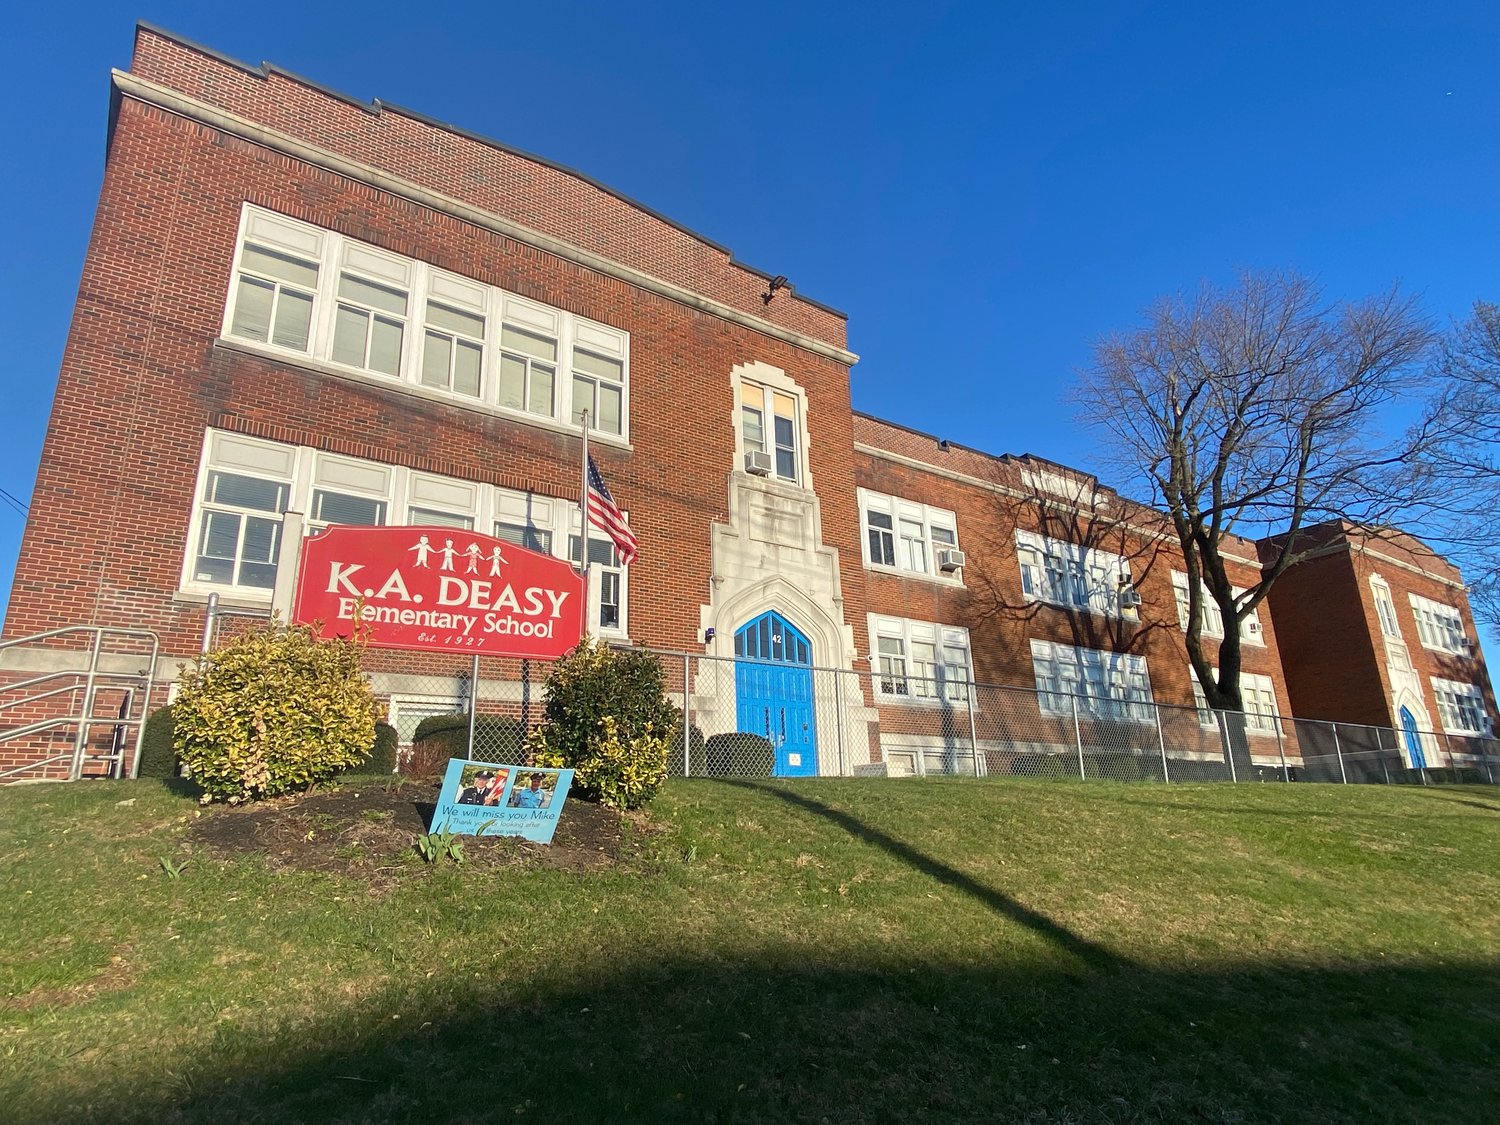 The extension of Deasy Elementary School will be included on the ballot for the Glen Cove City School District 2022-2023 budget vote on May 17. Classrooms, an elevator, and other facility renovations will be made during the construction.